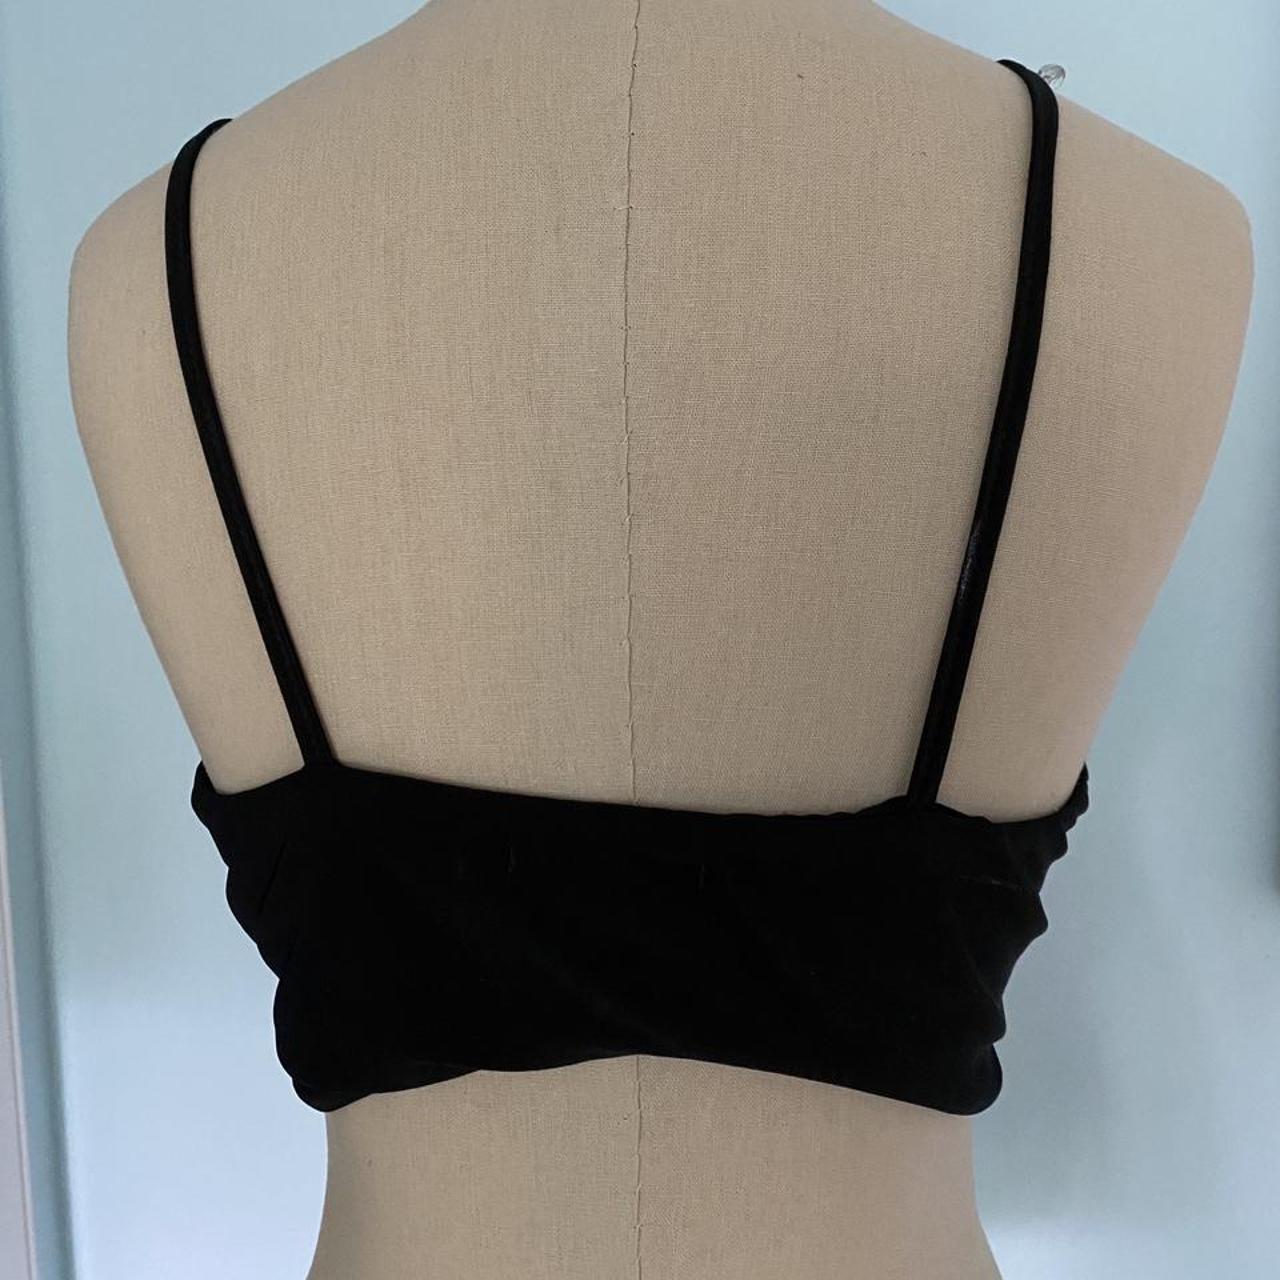 Product Image 2 - cute black top, great for